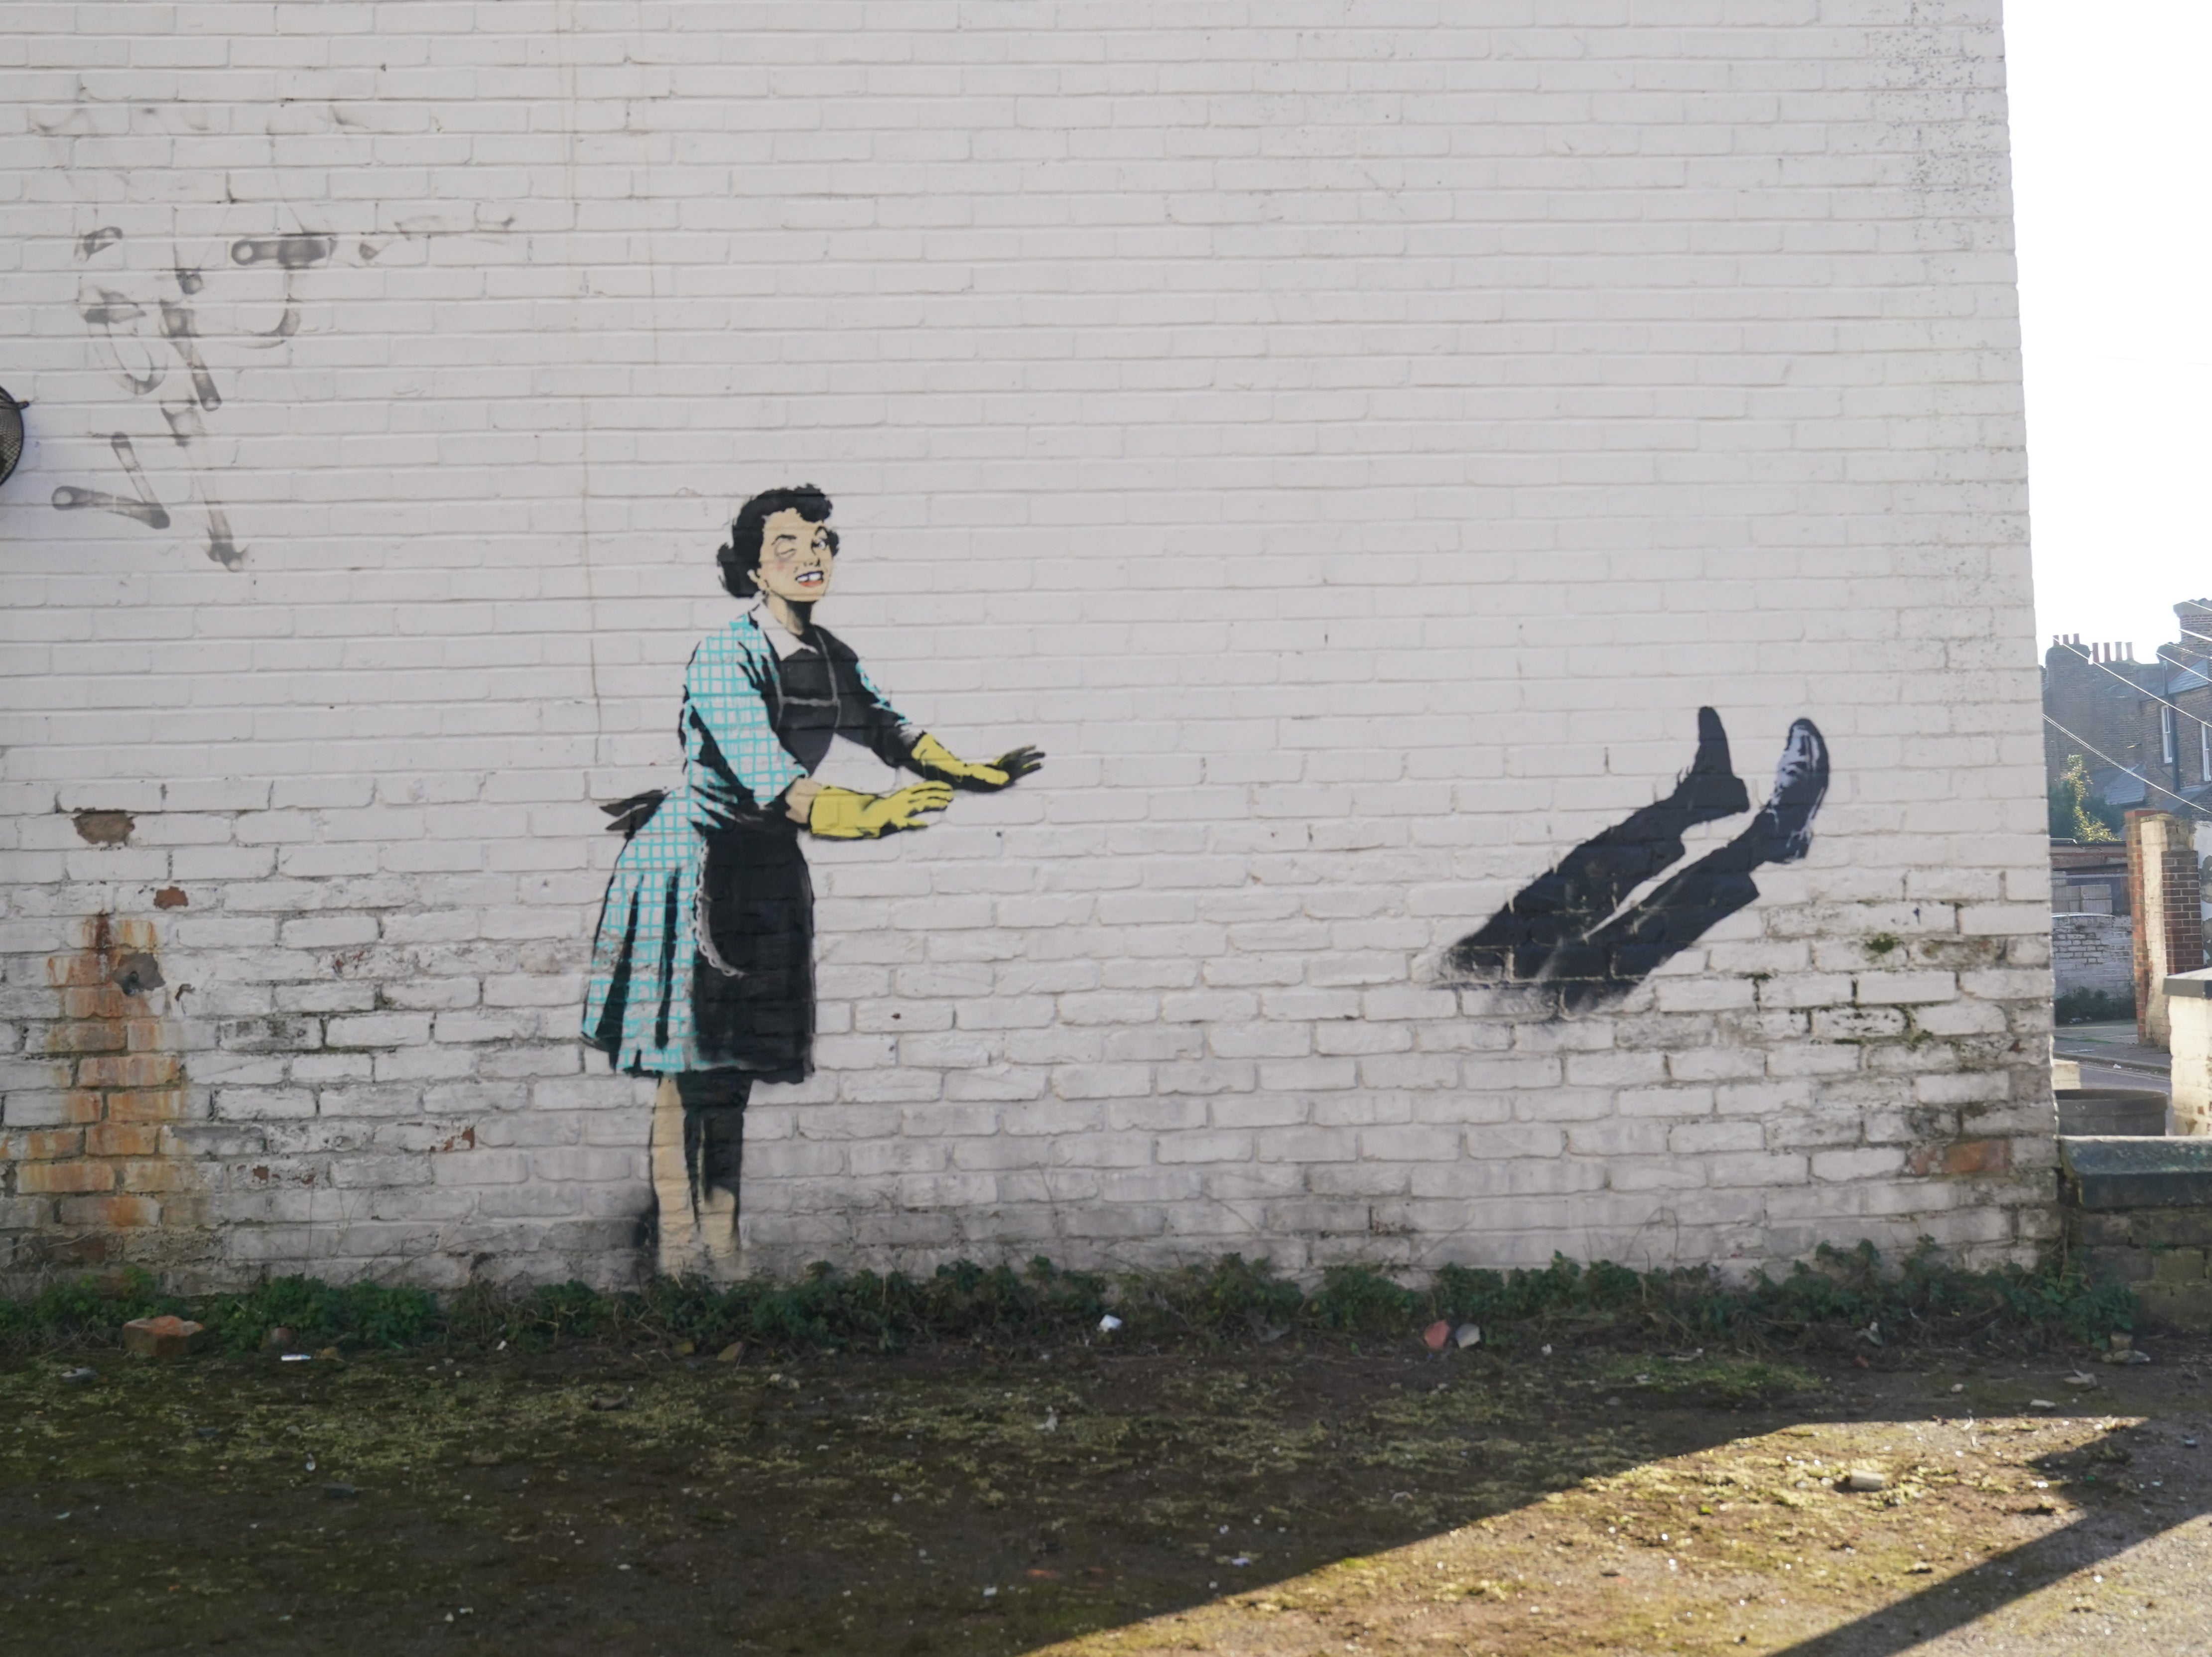 Banksy mural - Valentine’s day mascara, without the freezer